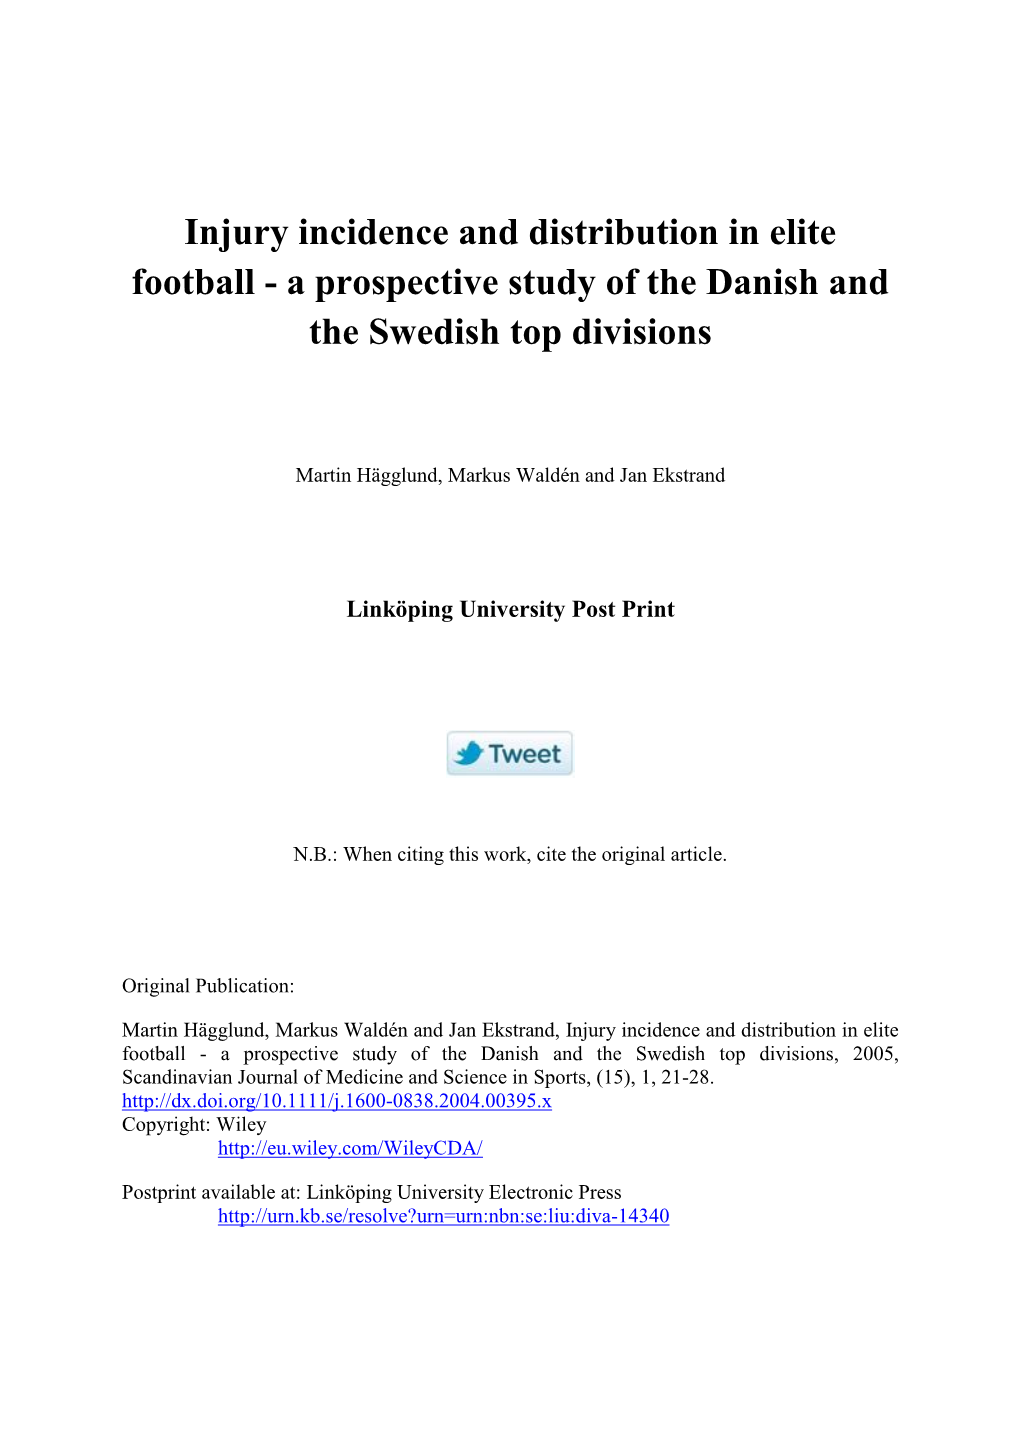 Injury Incidence and Distribution in Elite Football - a Prospective Study of the Danish and the Swedish Top Divisions